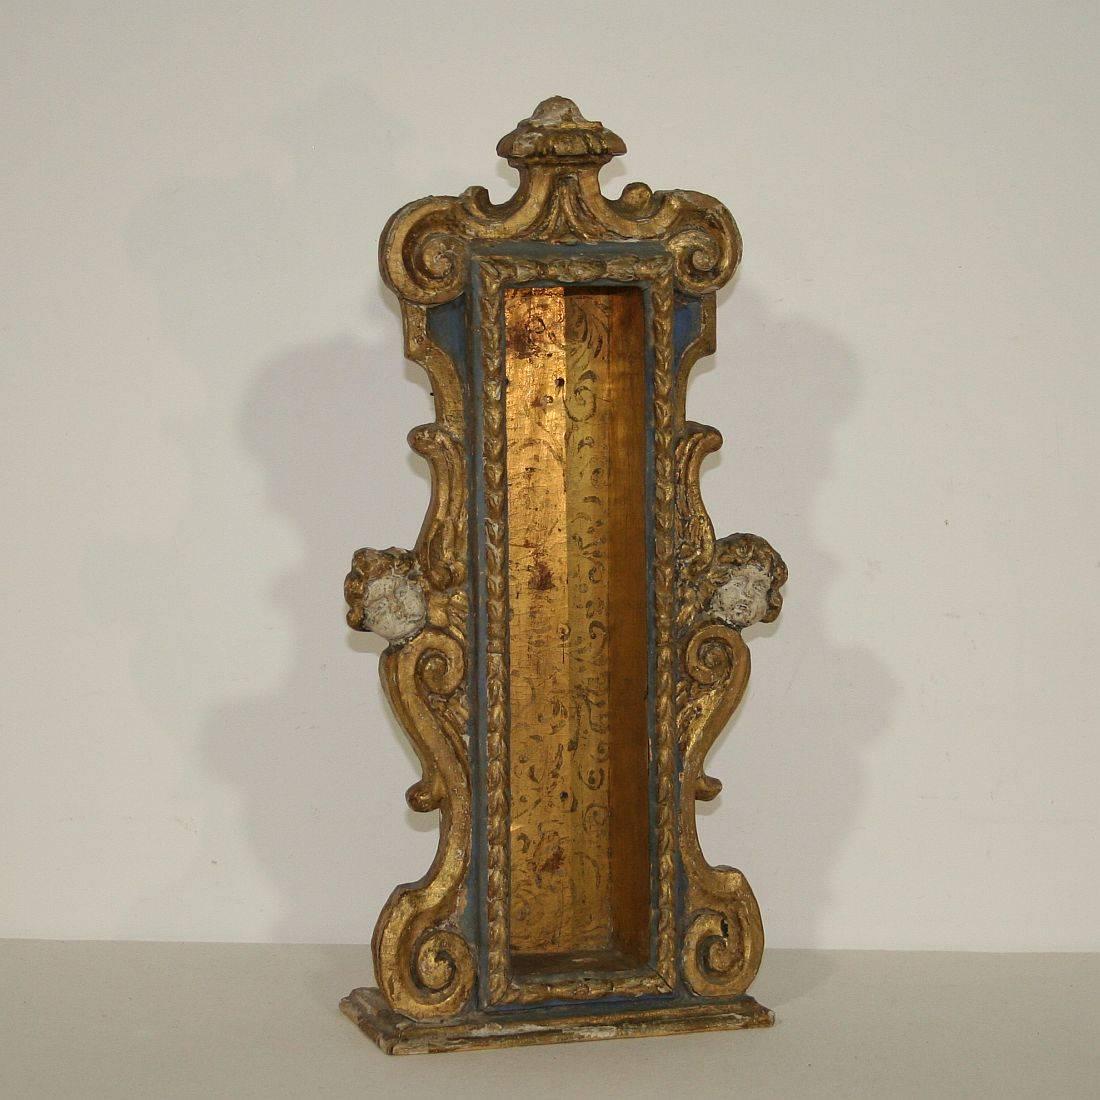 Hand-Carved Italian 18th Century Baroque Gilded Reliquary Shrine with Angel Heads